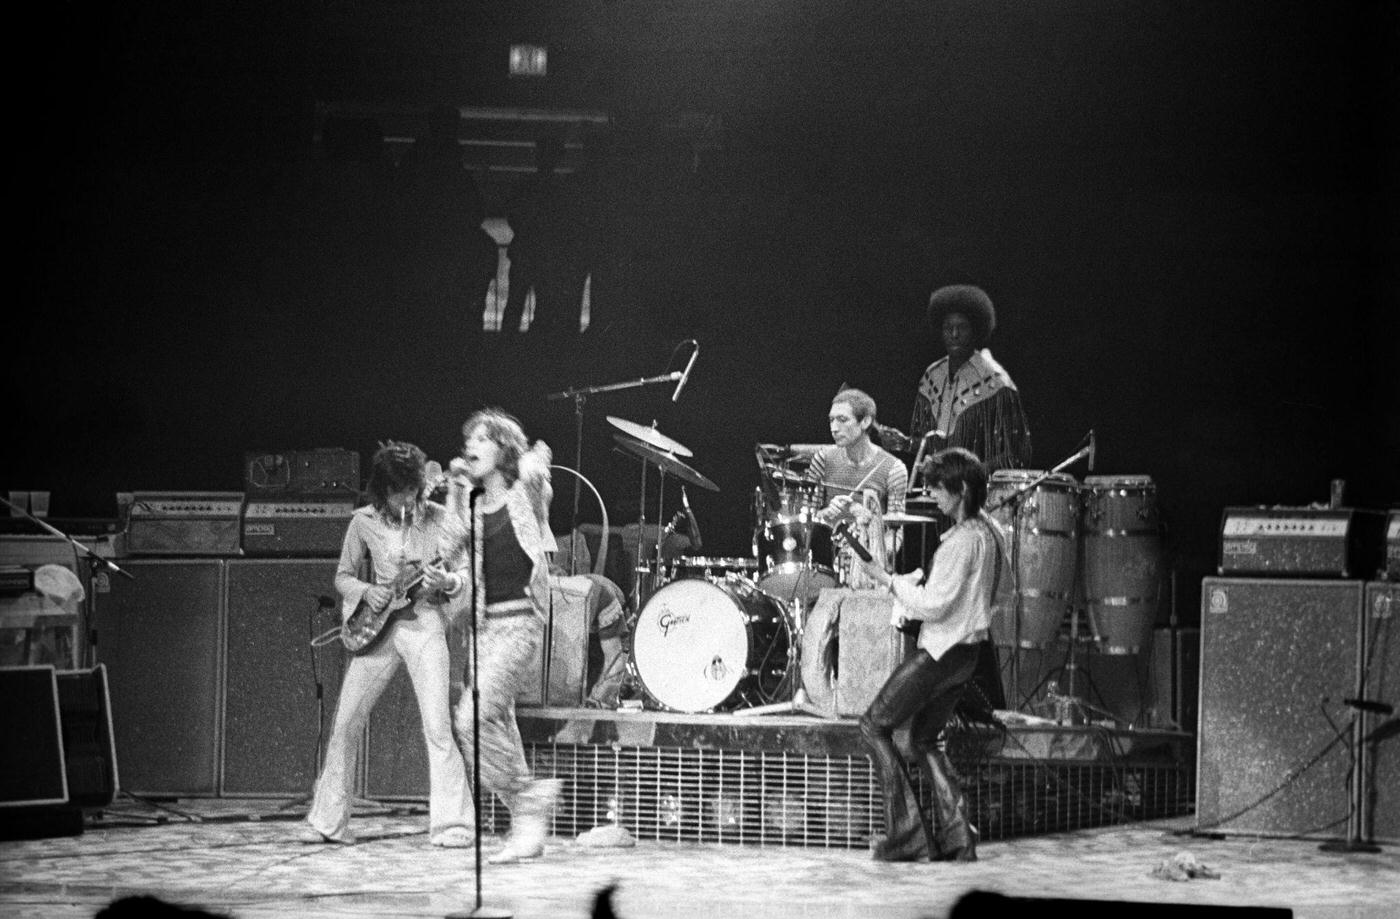 Ronnie Wood, Mick Jagger, Charlie Watts, and Keith Richards perform with percussionist Ollie Brown at Madison Square Garden during the band's "Tour of America '75" on June 25, 1975, in New York, New York.